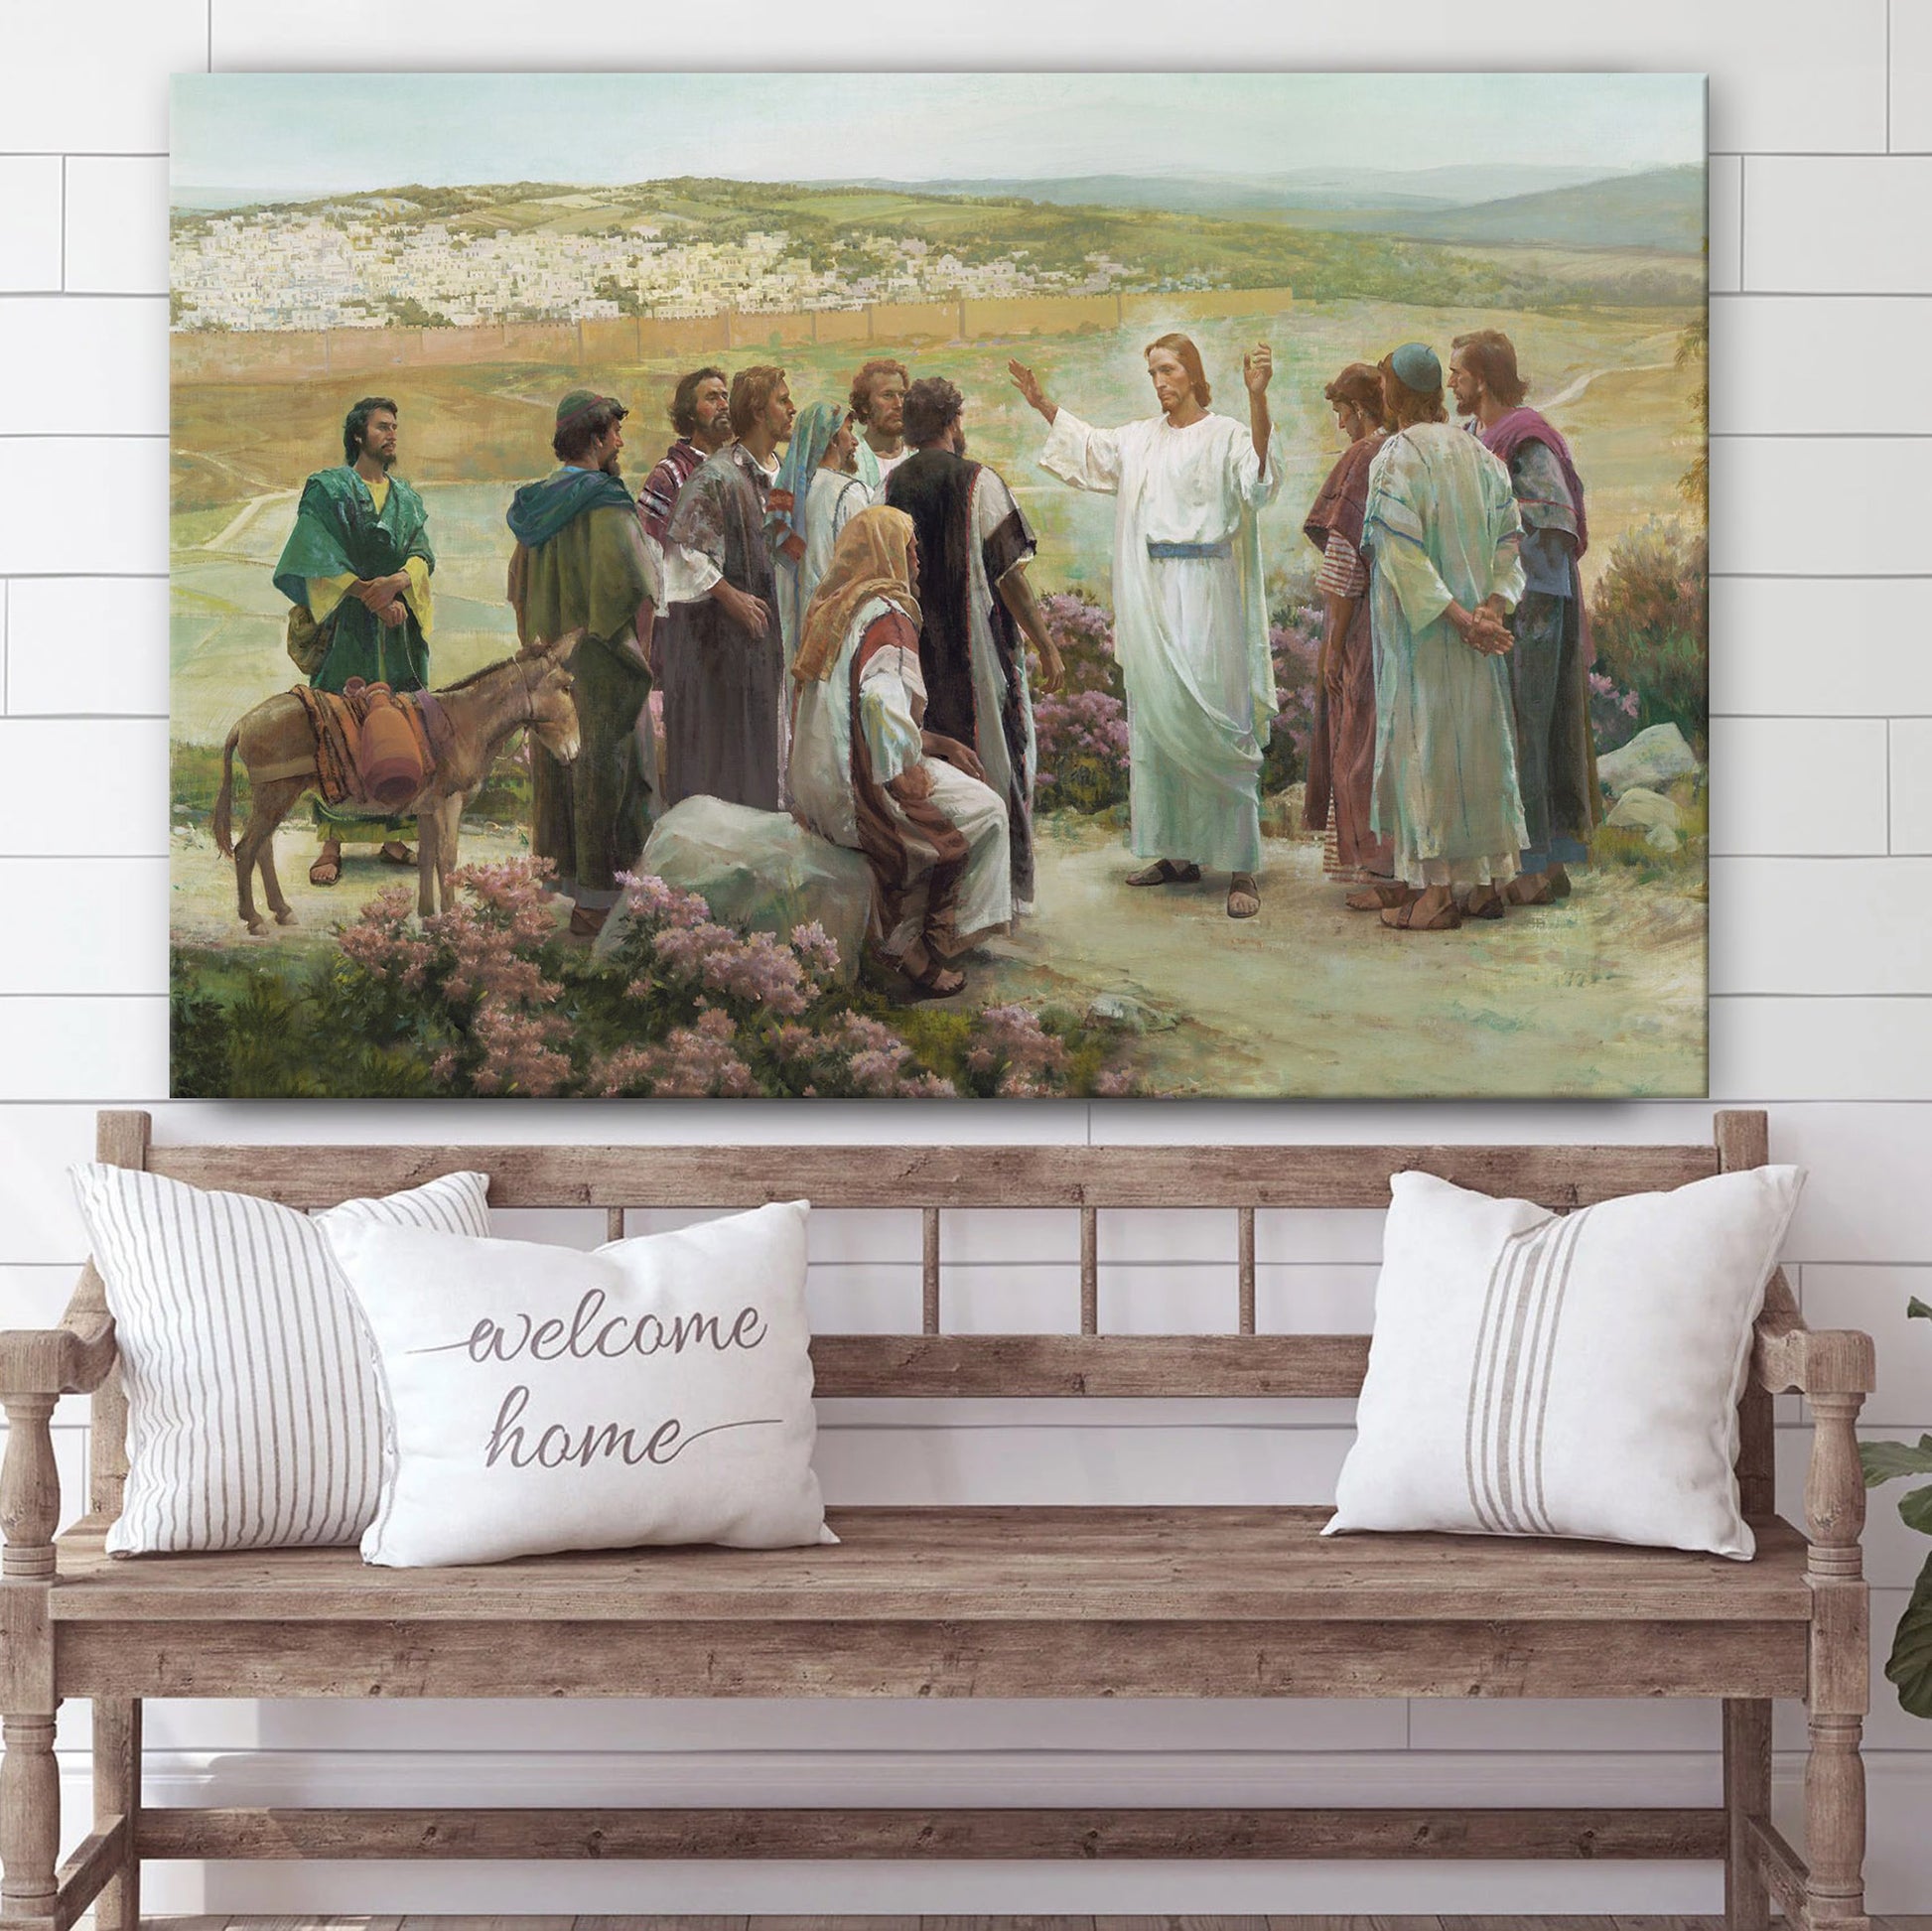 Go Ye Therefore Canvas Wall Art - Christian Canvas Pictures - Religious Canvas Wall Art